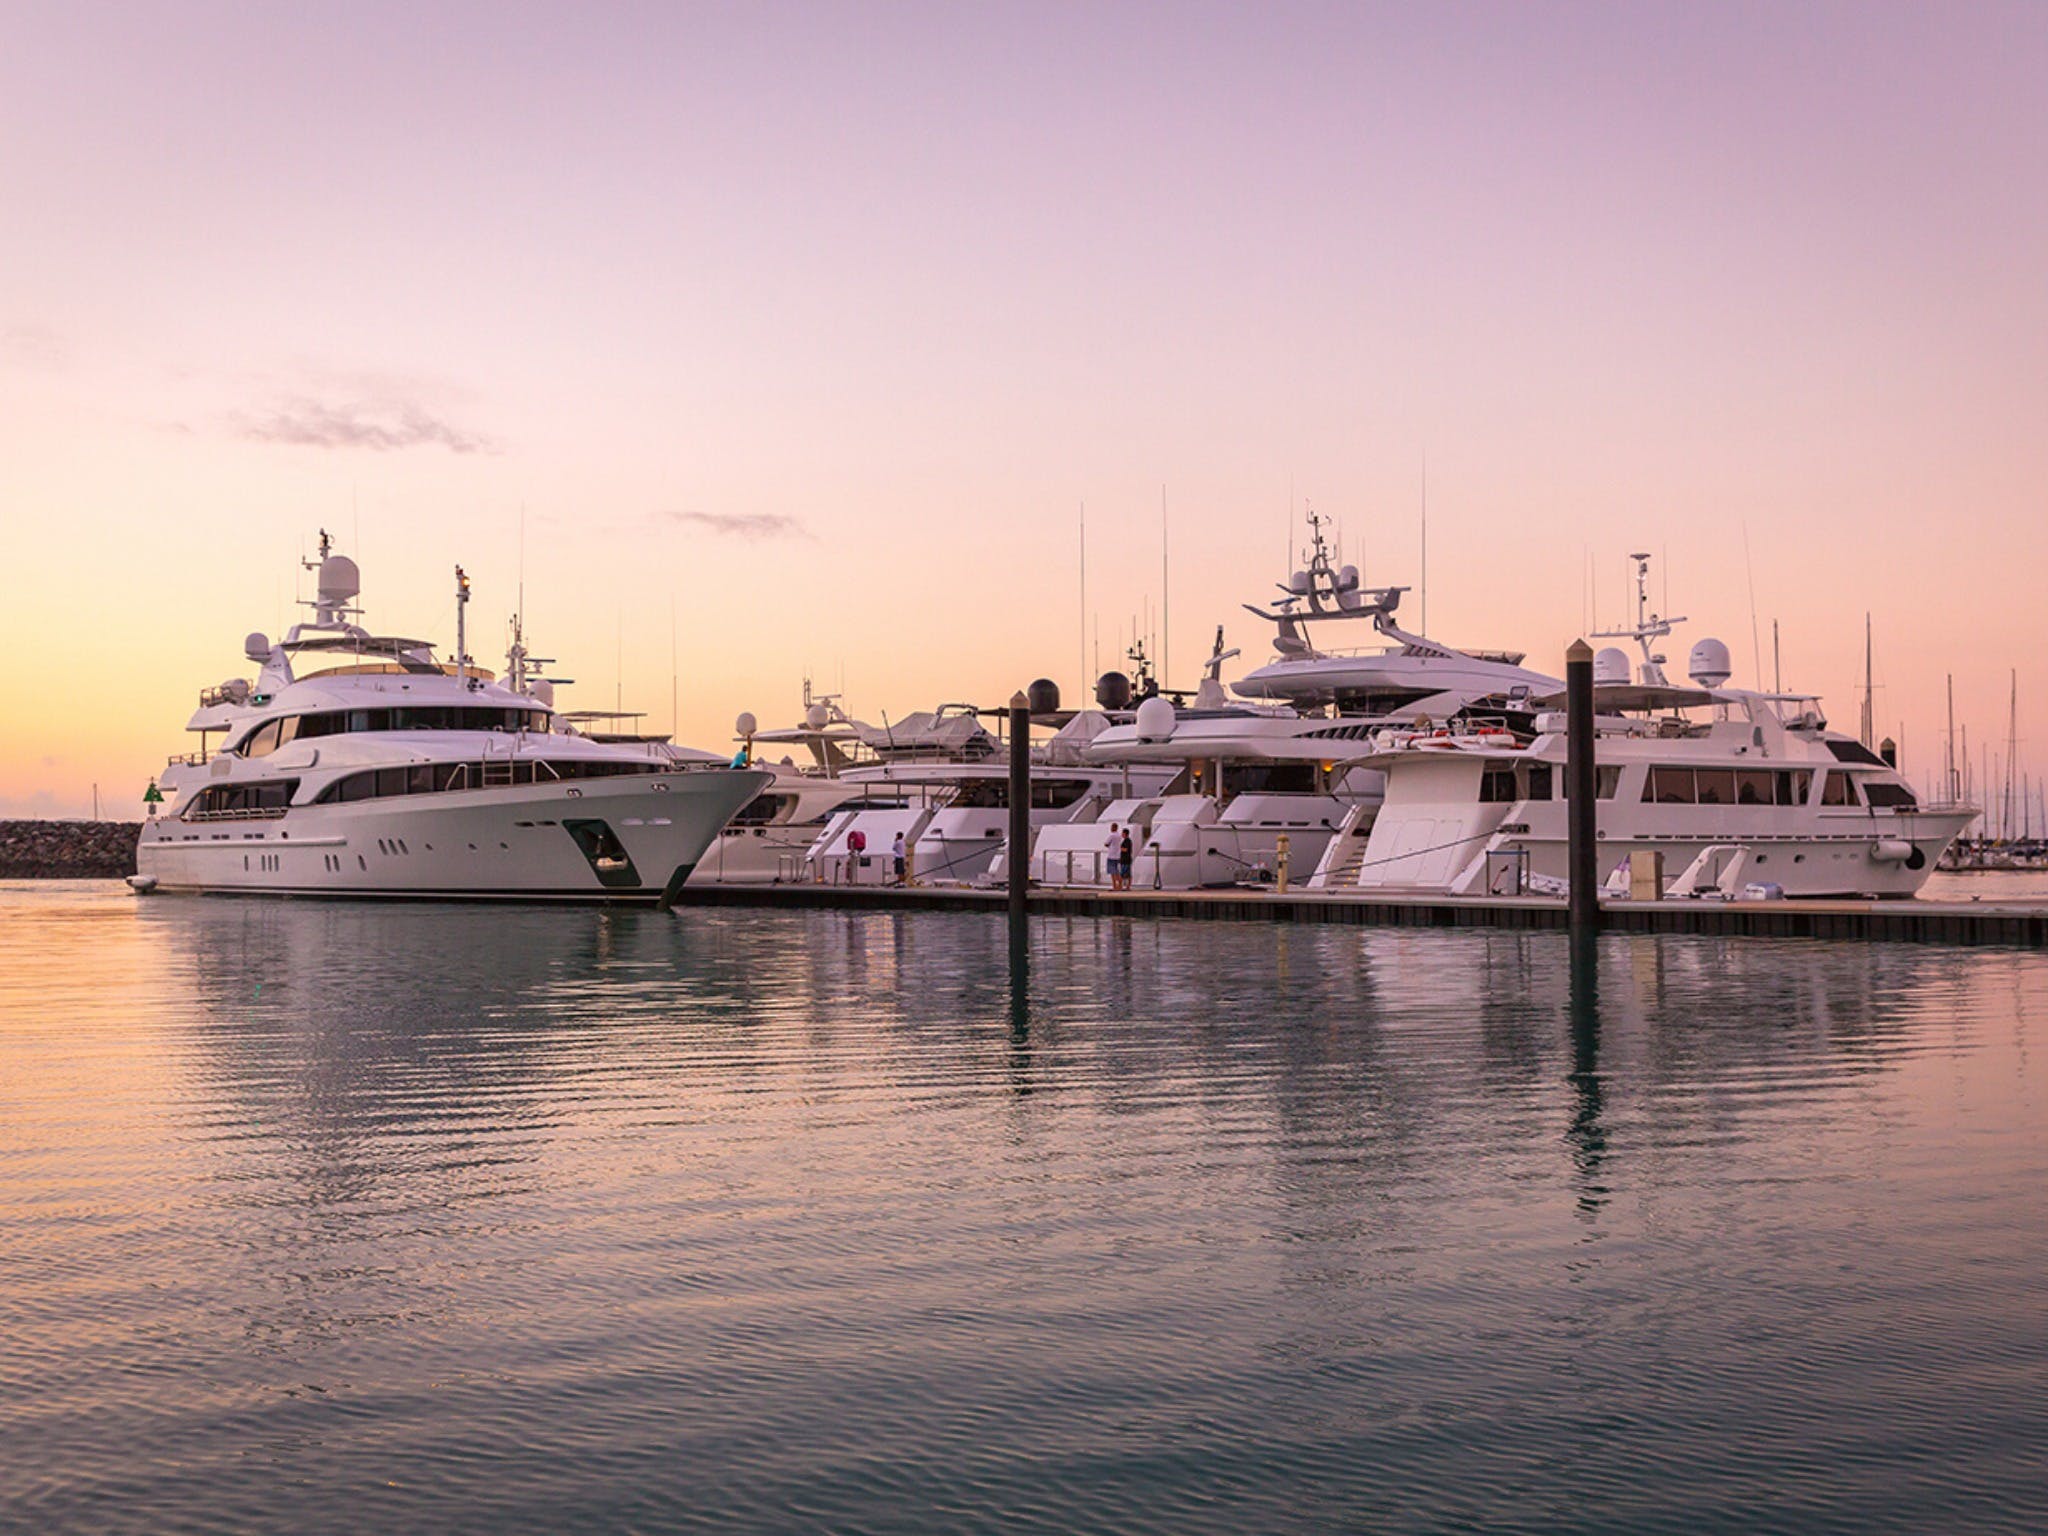 Australian Superyacht Rendezvous - Great Barrier Reef edition - Nambucca Heads Accommodation